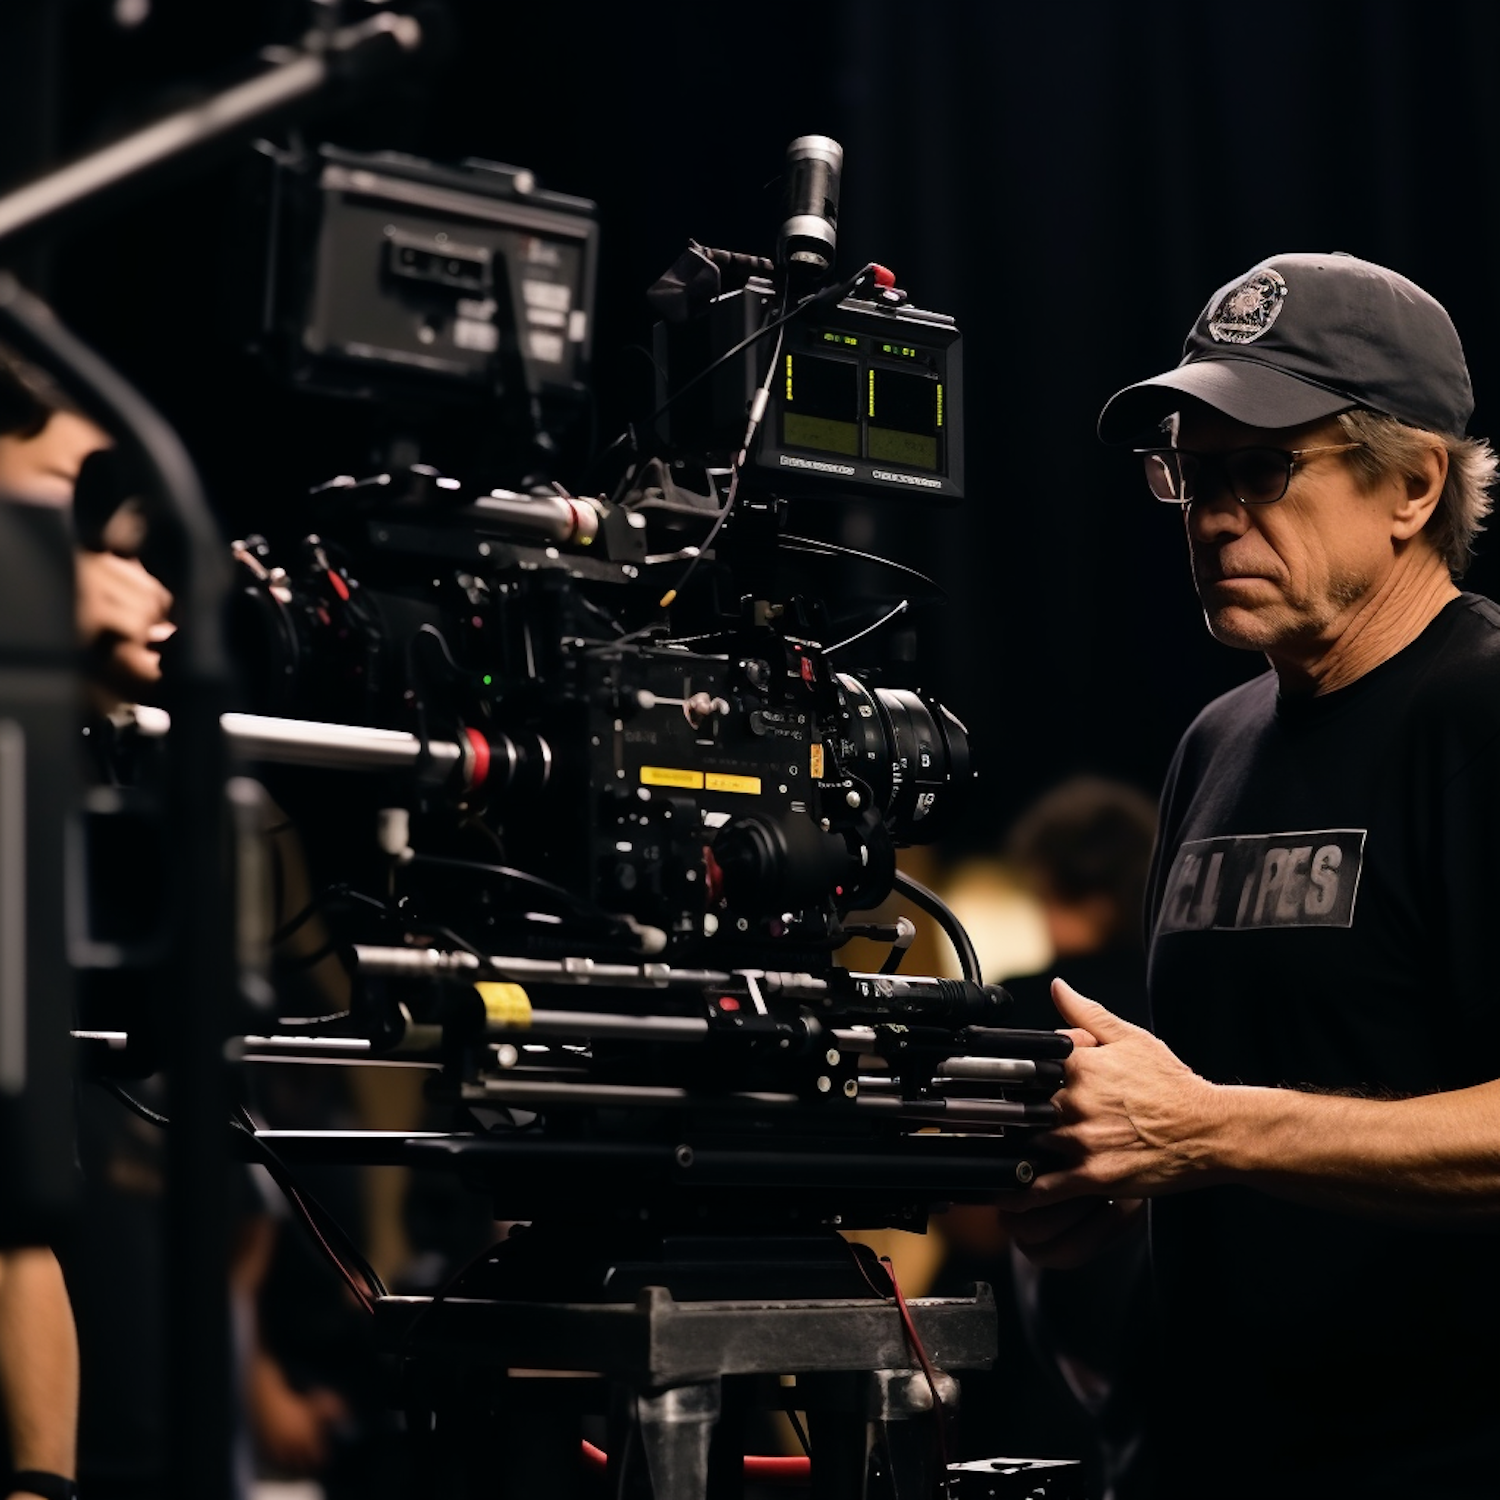 Technical Precision: Cinematographer at Work